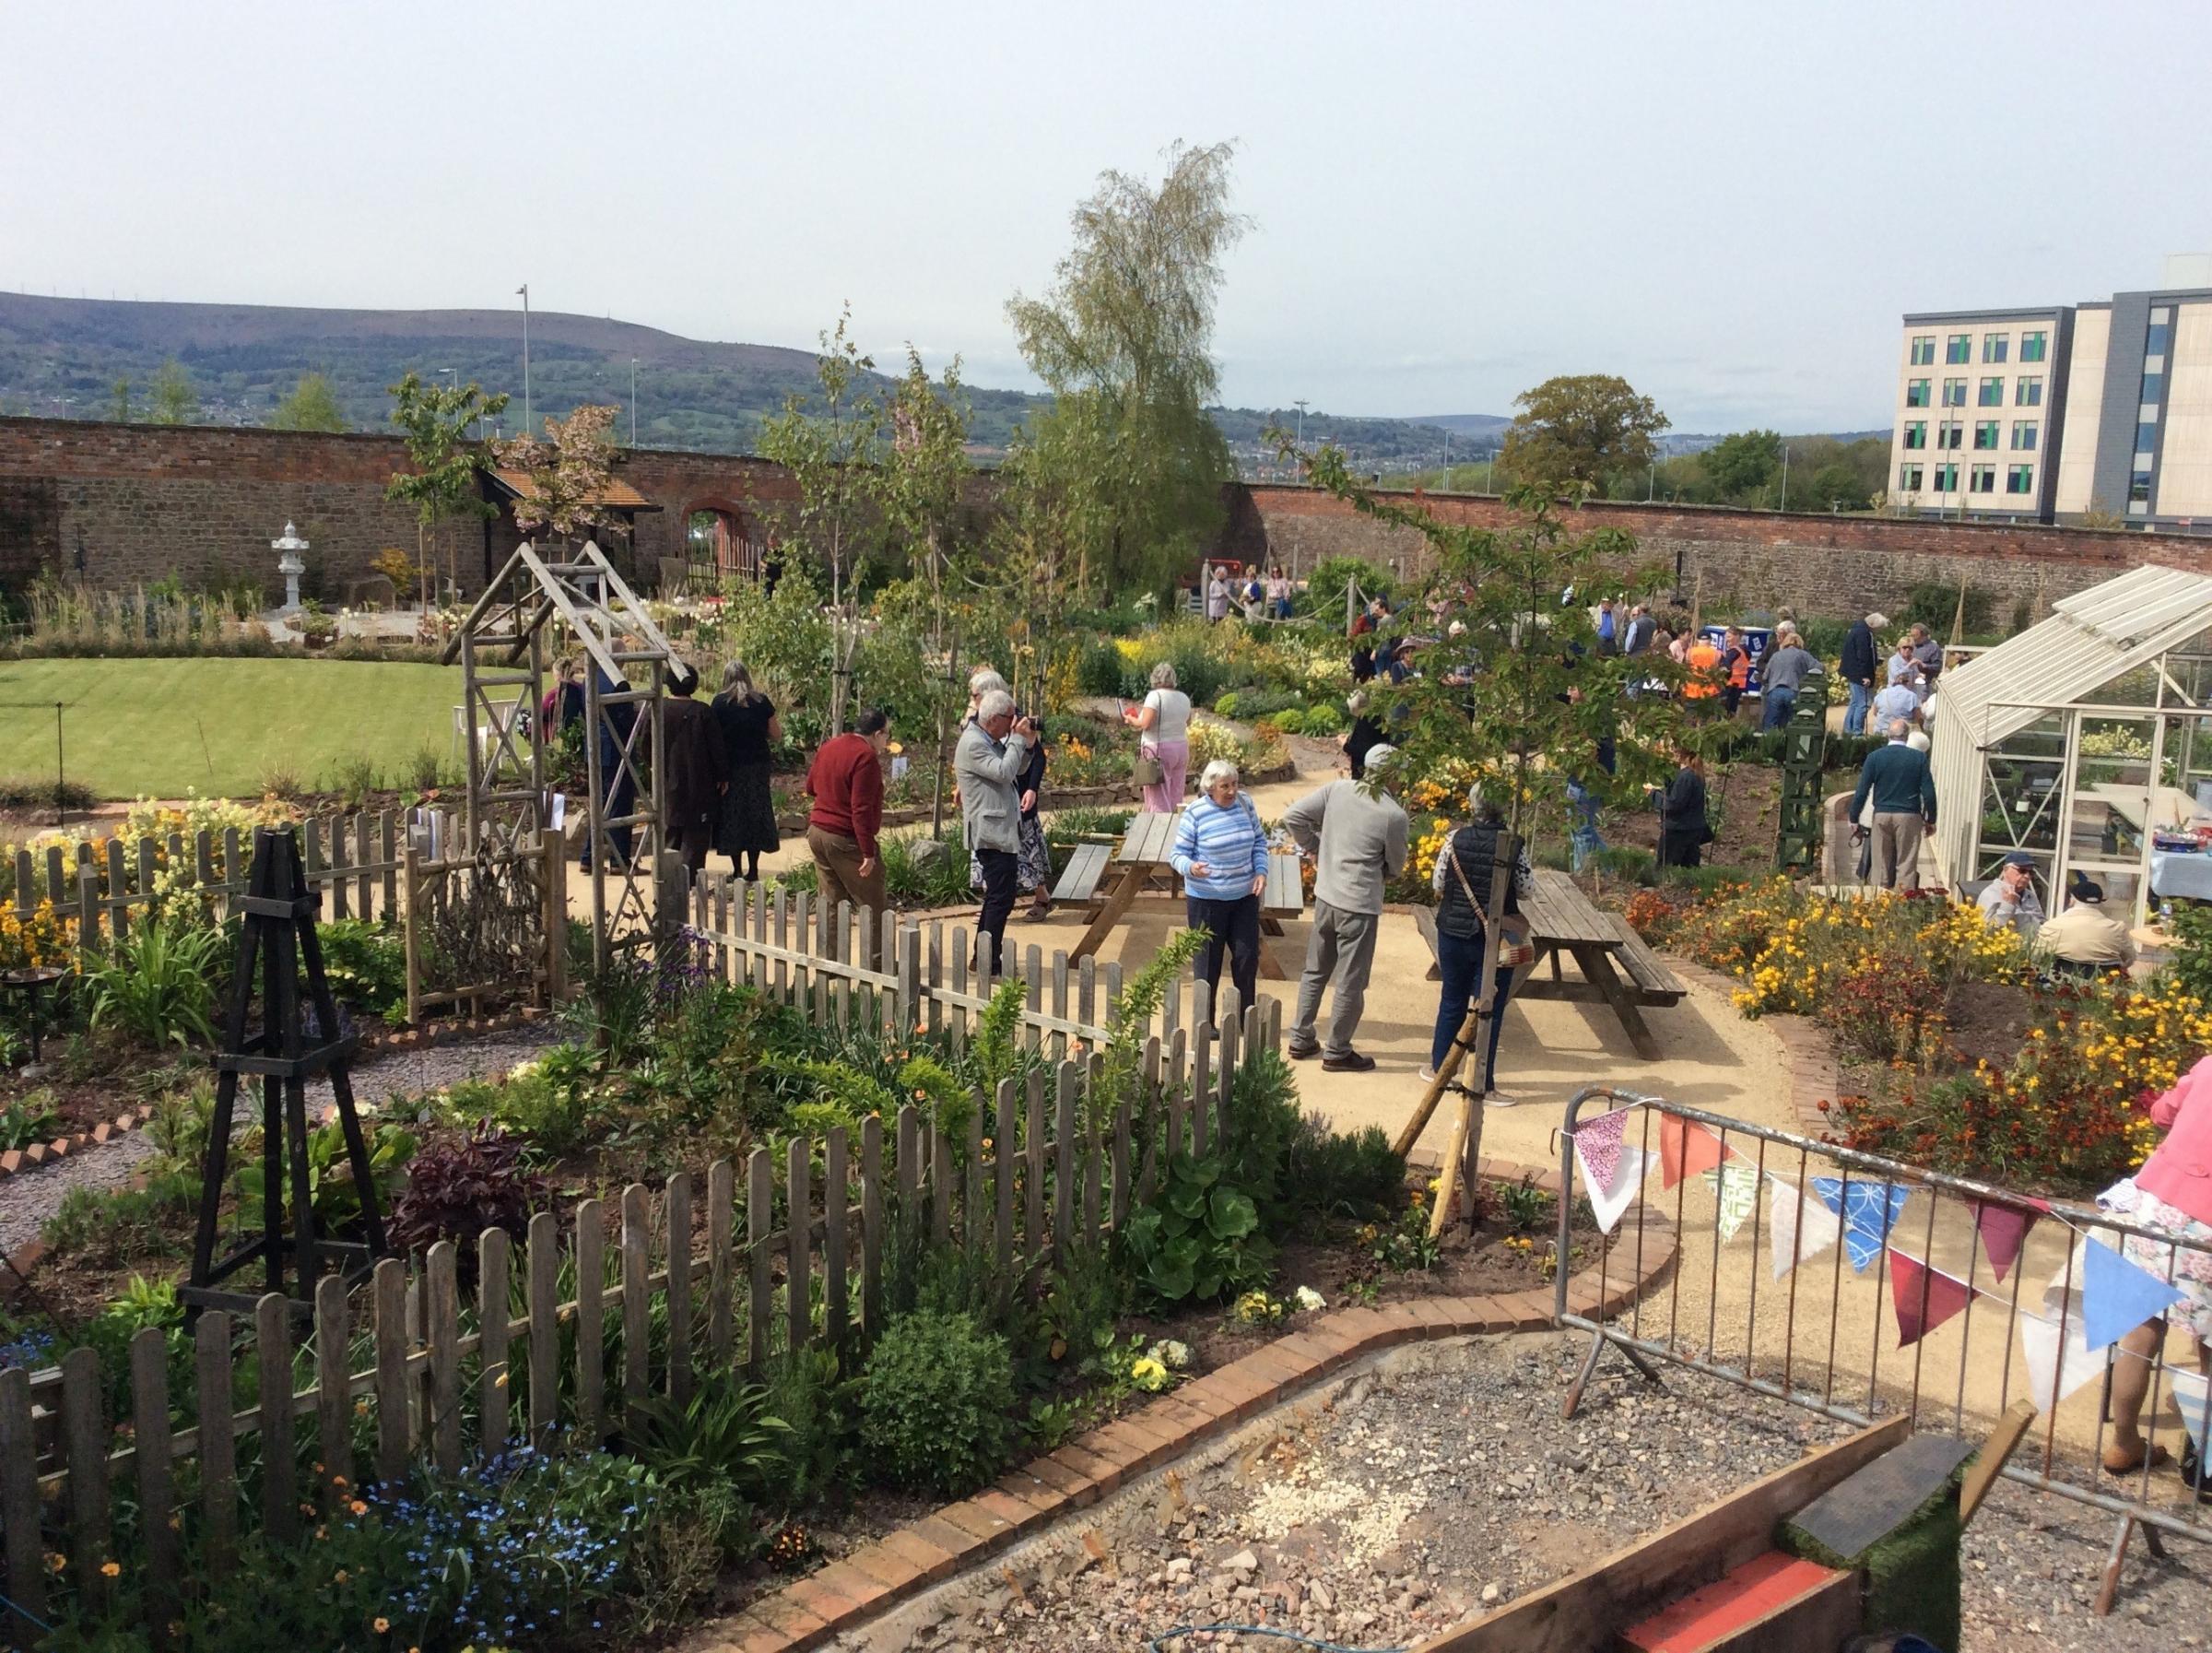 NOW: The transformed walled garden is open to visitors